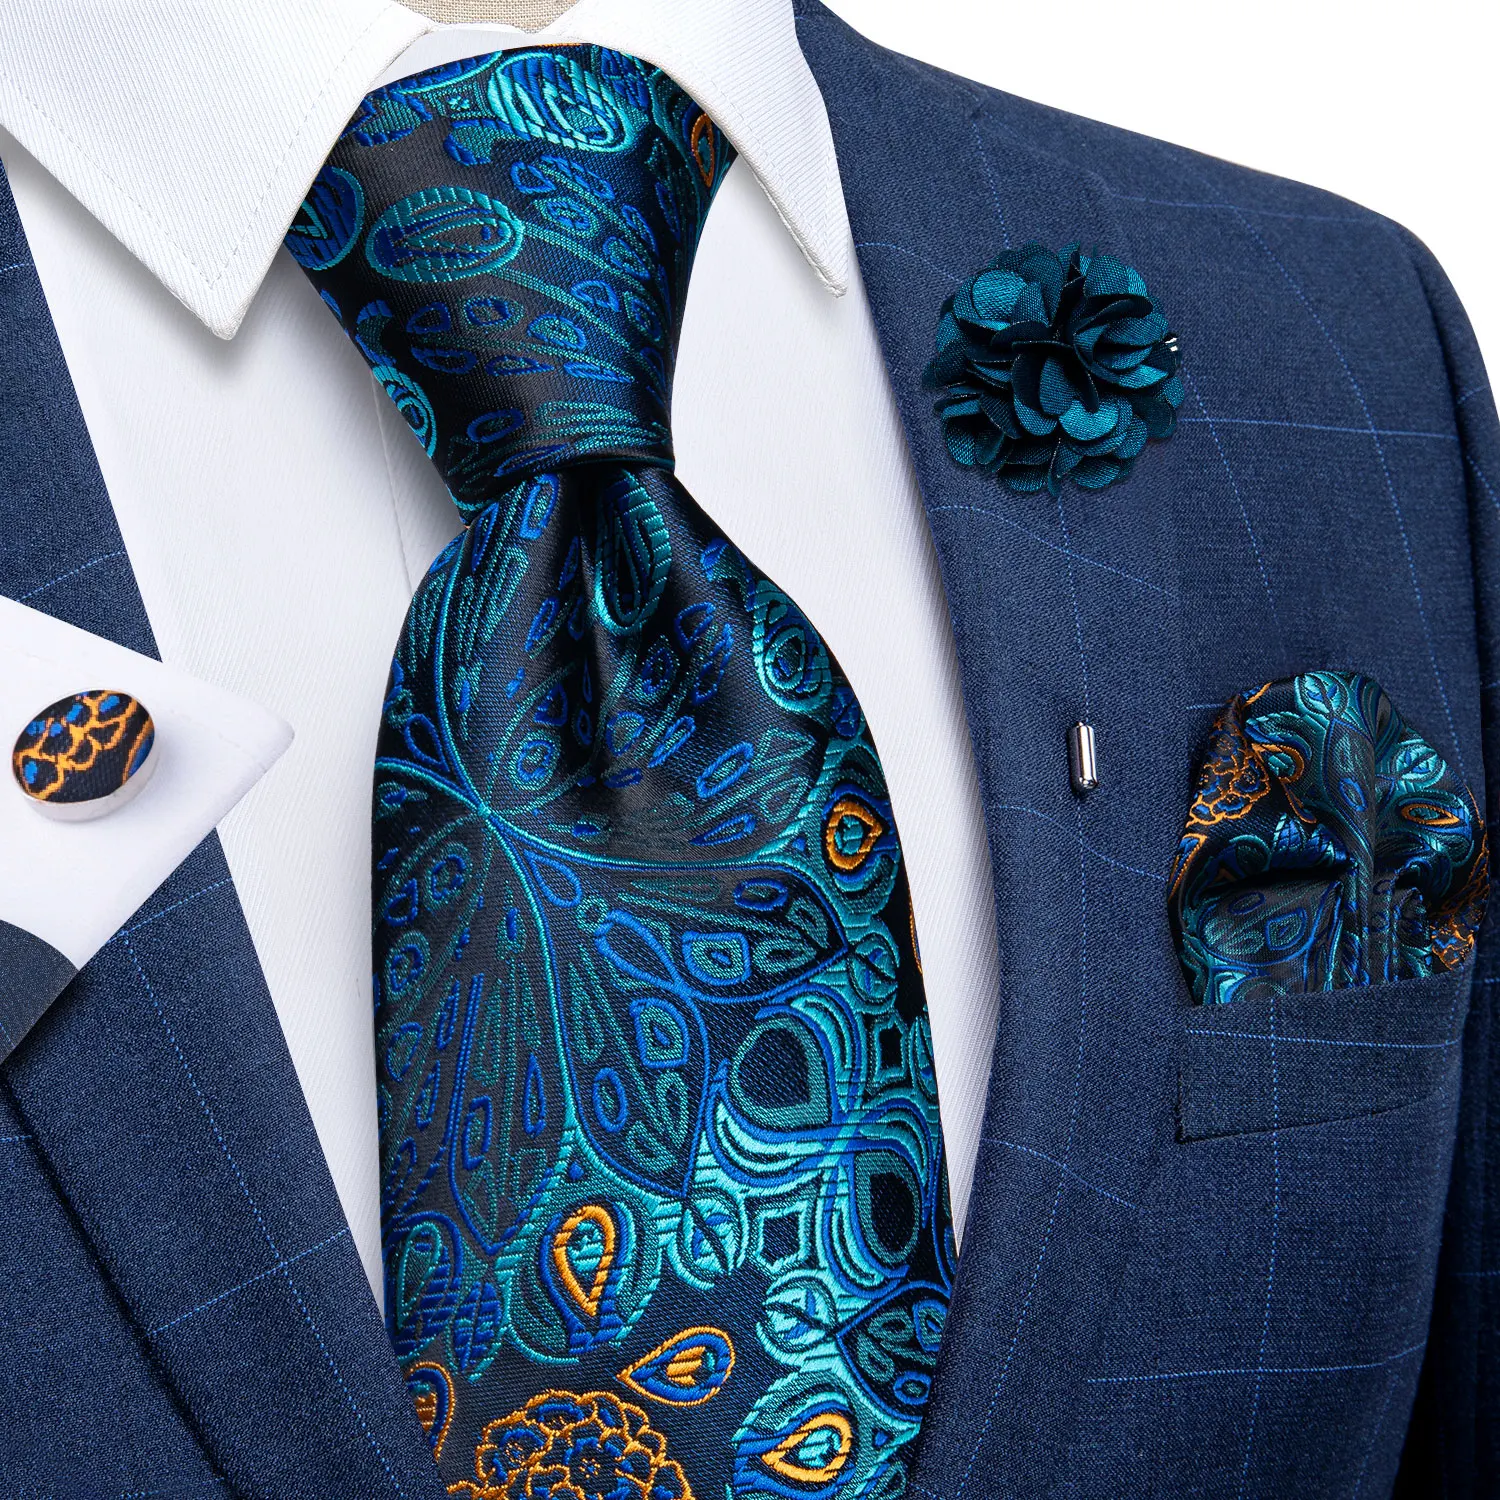 Blue Paisley Floral Silk Men's Neck Tie Set Business Wedding Formal Ties For Men With Brooch Pin Pocket Square Cufflinks Gift